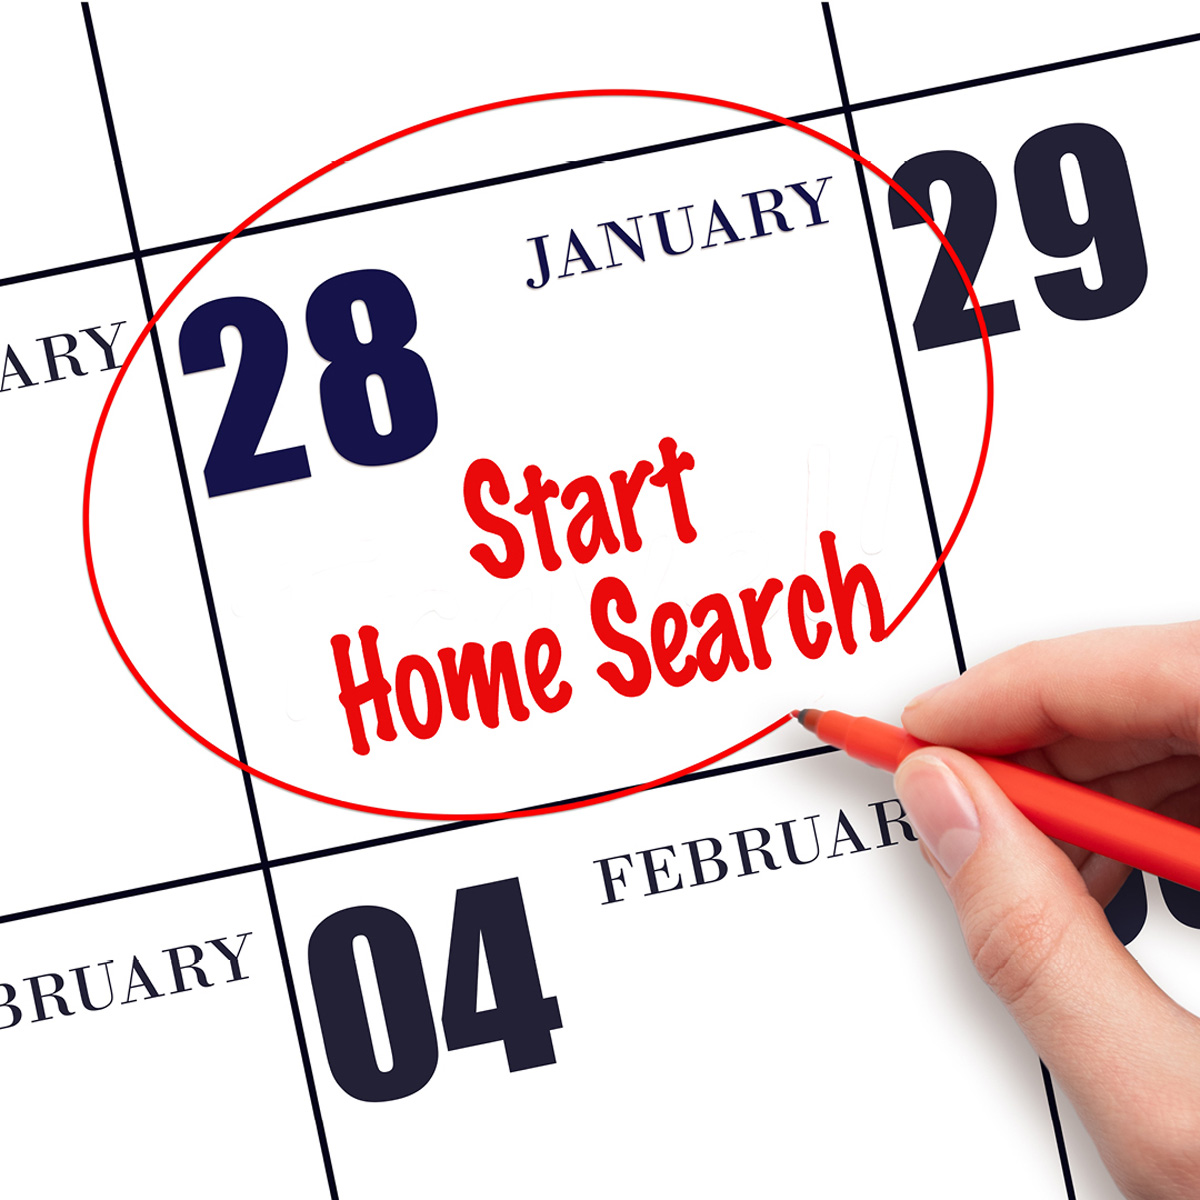 Ready to find your dream home? Start your search today! With so many listings to choose from, you're sure to find a place that fits your needs. #startyoursearch #homesearch